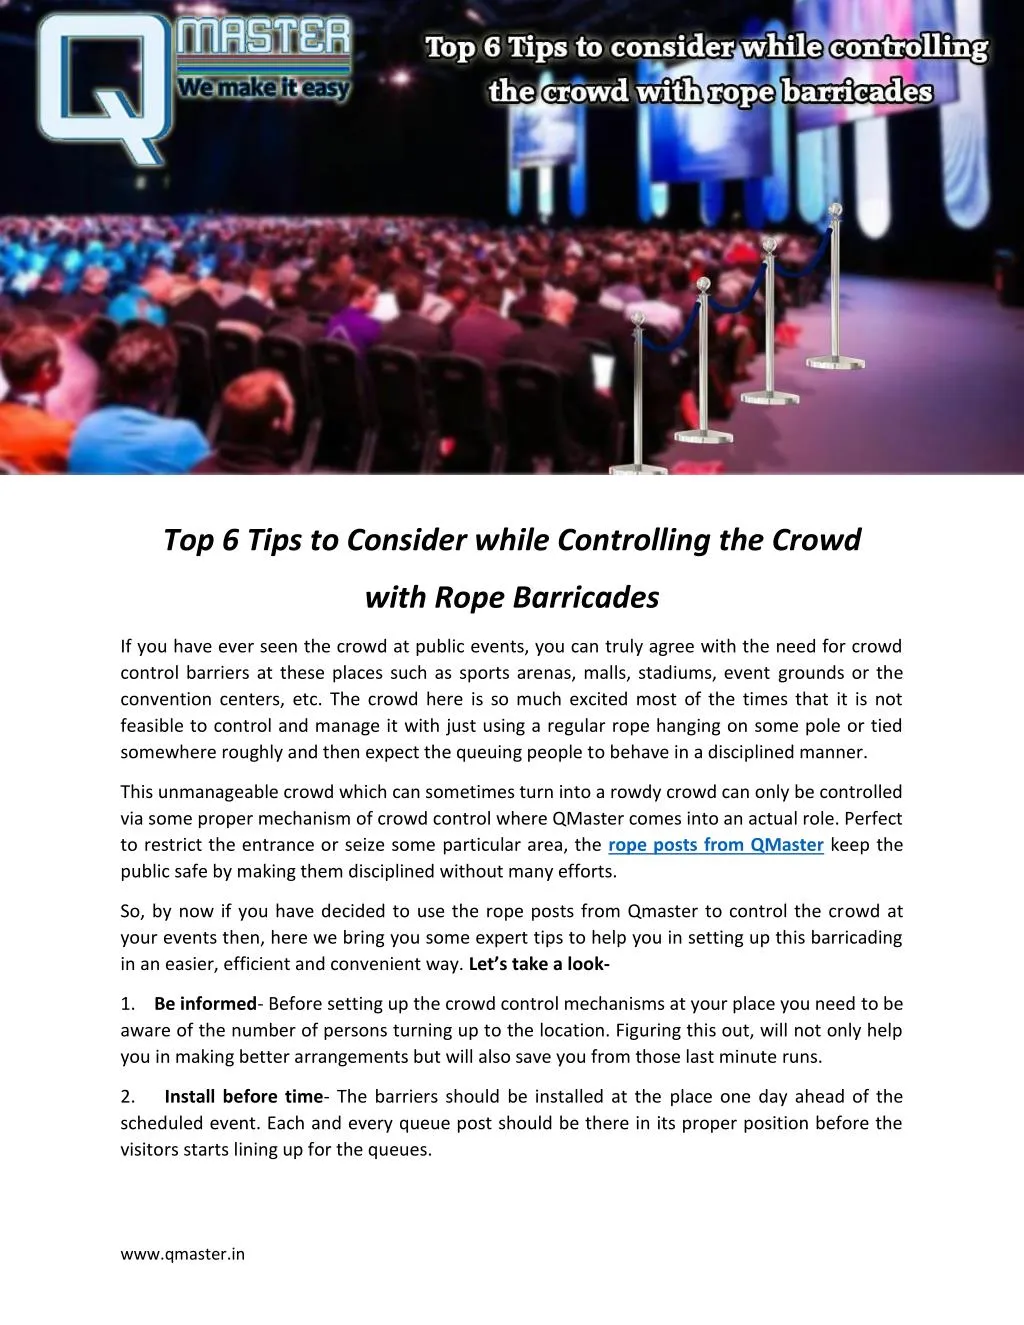 top 6 tips to consider while controlling the crowd